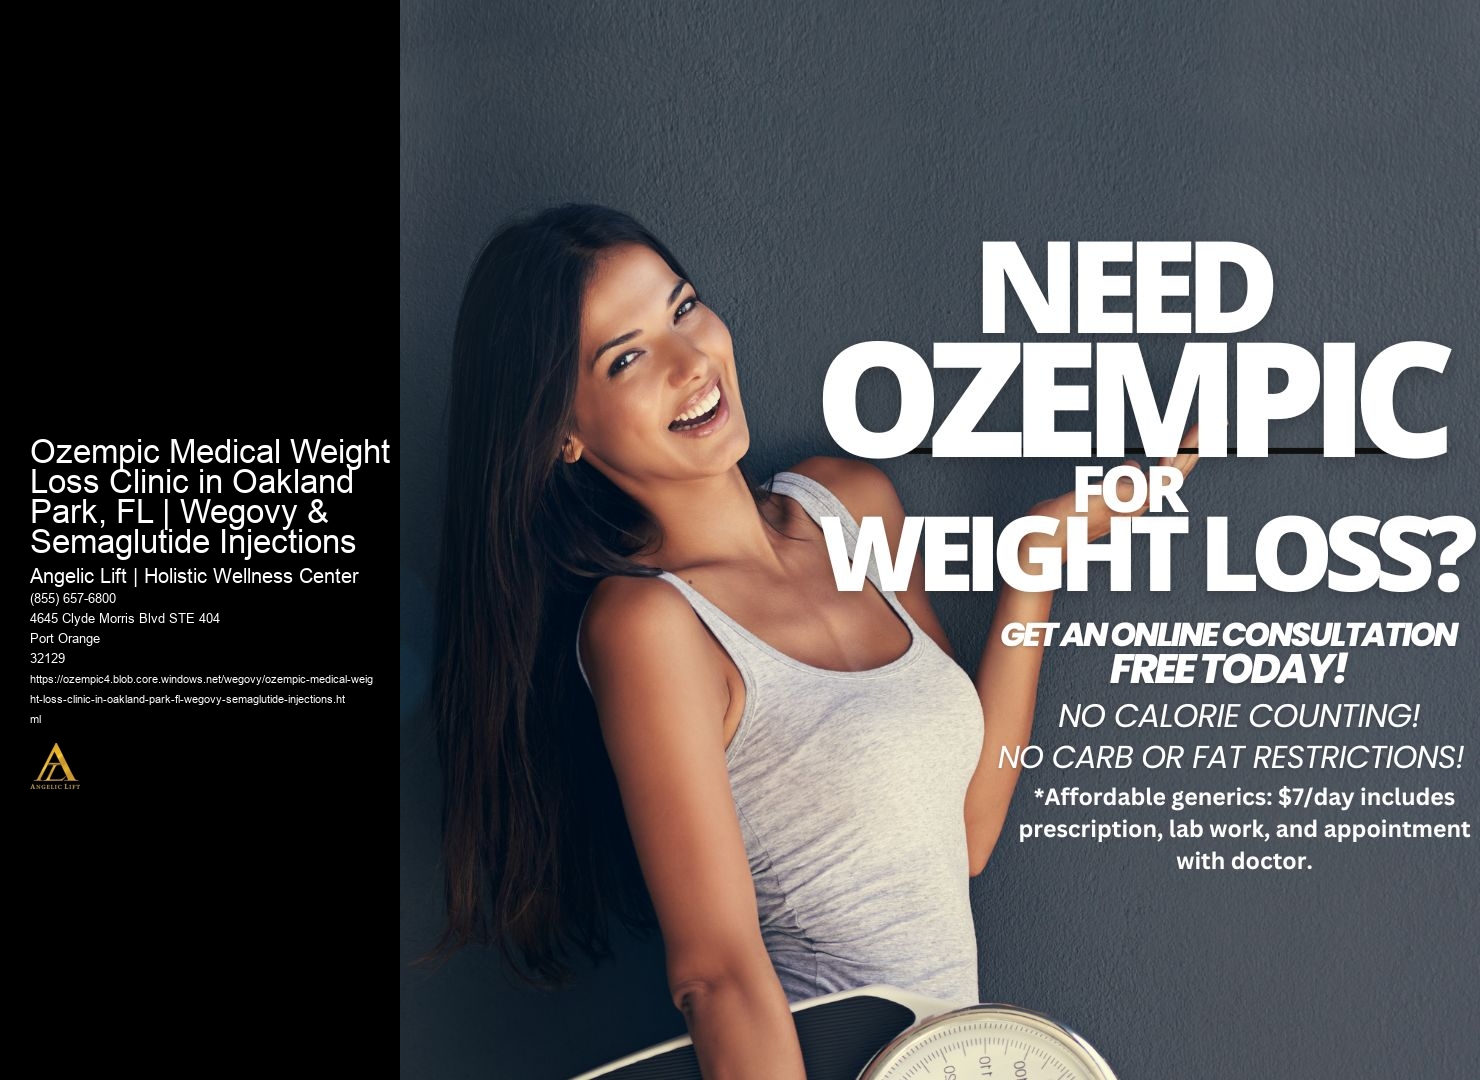 Ozempic Medical Weight Loss Clinic in Oakland Park, FL | Wegovy & Semaglutide Injections